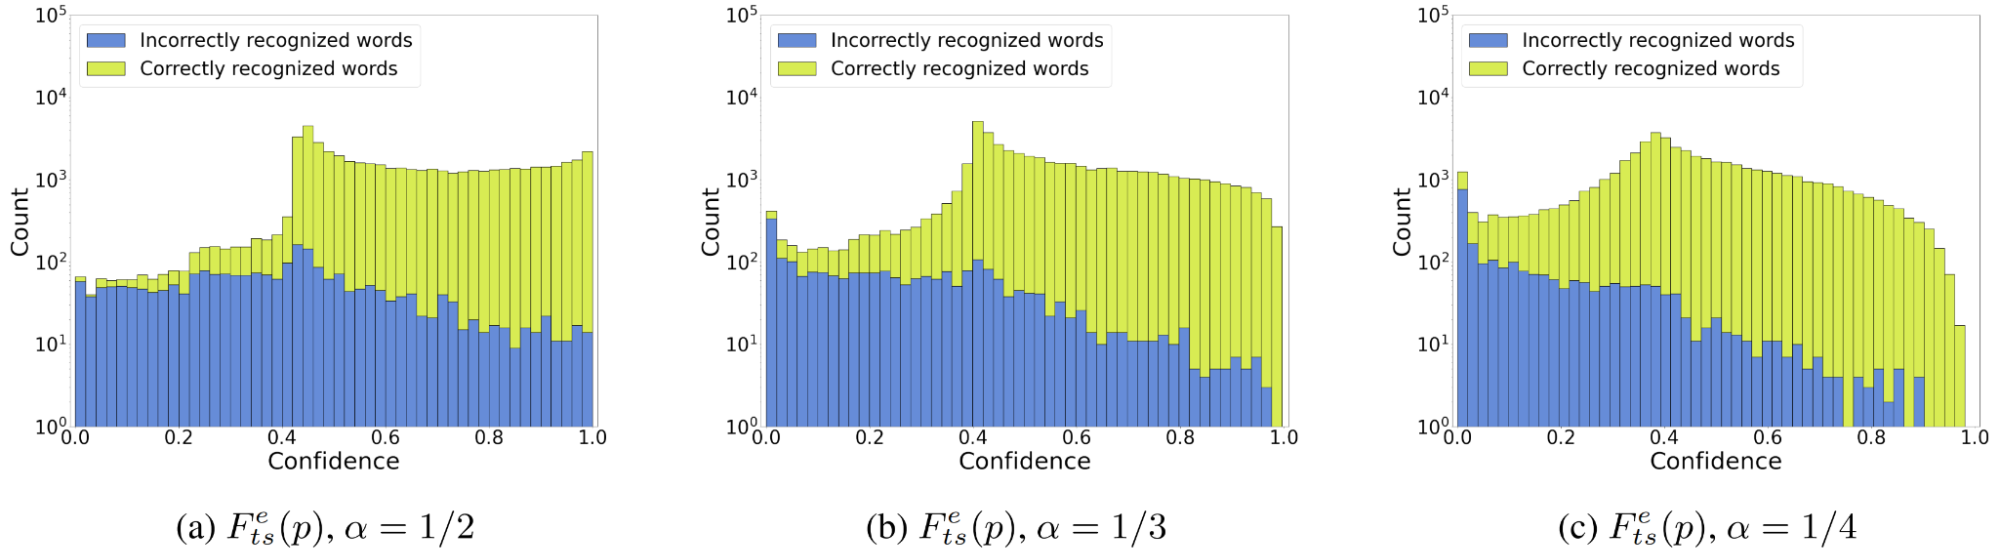 Three similar log-histograms of correctly and incorrectly recognized words against their confidence scores. From left to right, they correspond to alpha values ½, ⅓, and ¼. The left histogram has two peaks near 0.4 and 1 for the correct word distribution and a plateau between them. The incorrect distribution also has a peak near 0.4, a plateau from the left, and a gentle slope from the right. The center and the right histograms are very much alike, with only two differences: the incorrect distribution of the right histogram does not reach 1, while the correct distribution has a flatter slope from 0.4 to 0.